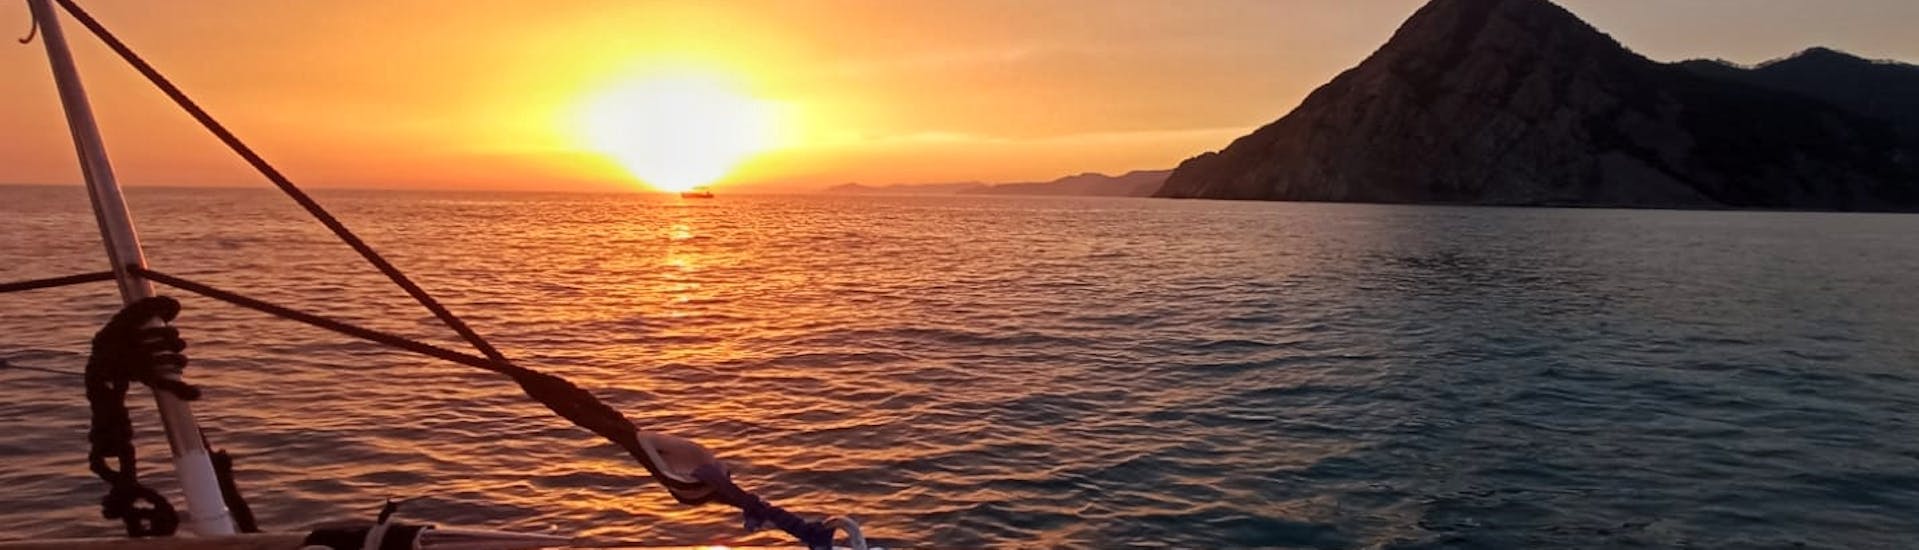 Private Sunset Boat Trip to the Cinque Terre with Aperitif.